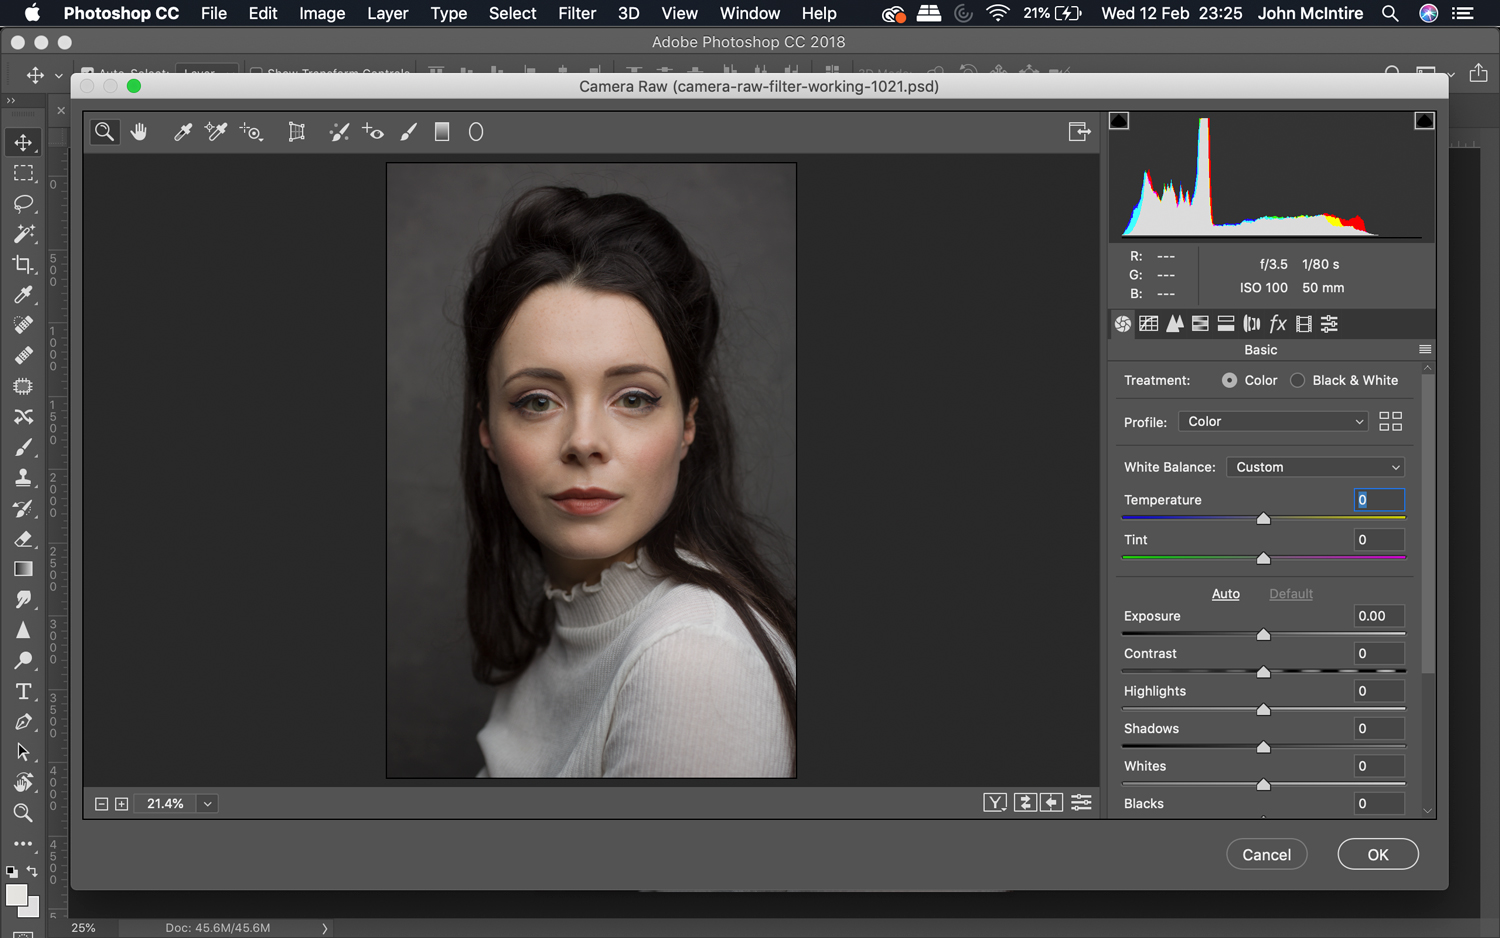 How to use the Photoshop Camera Raw filter 